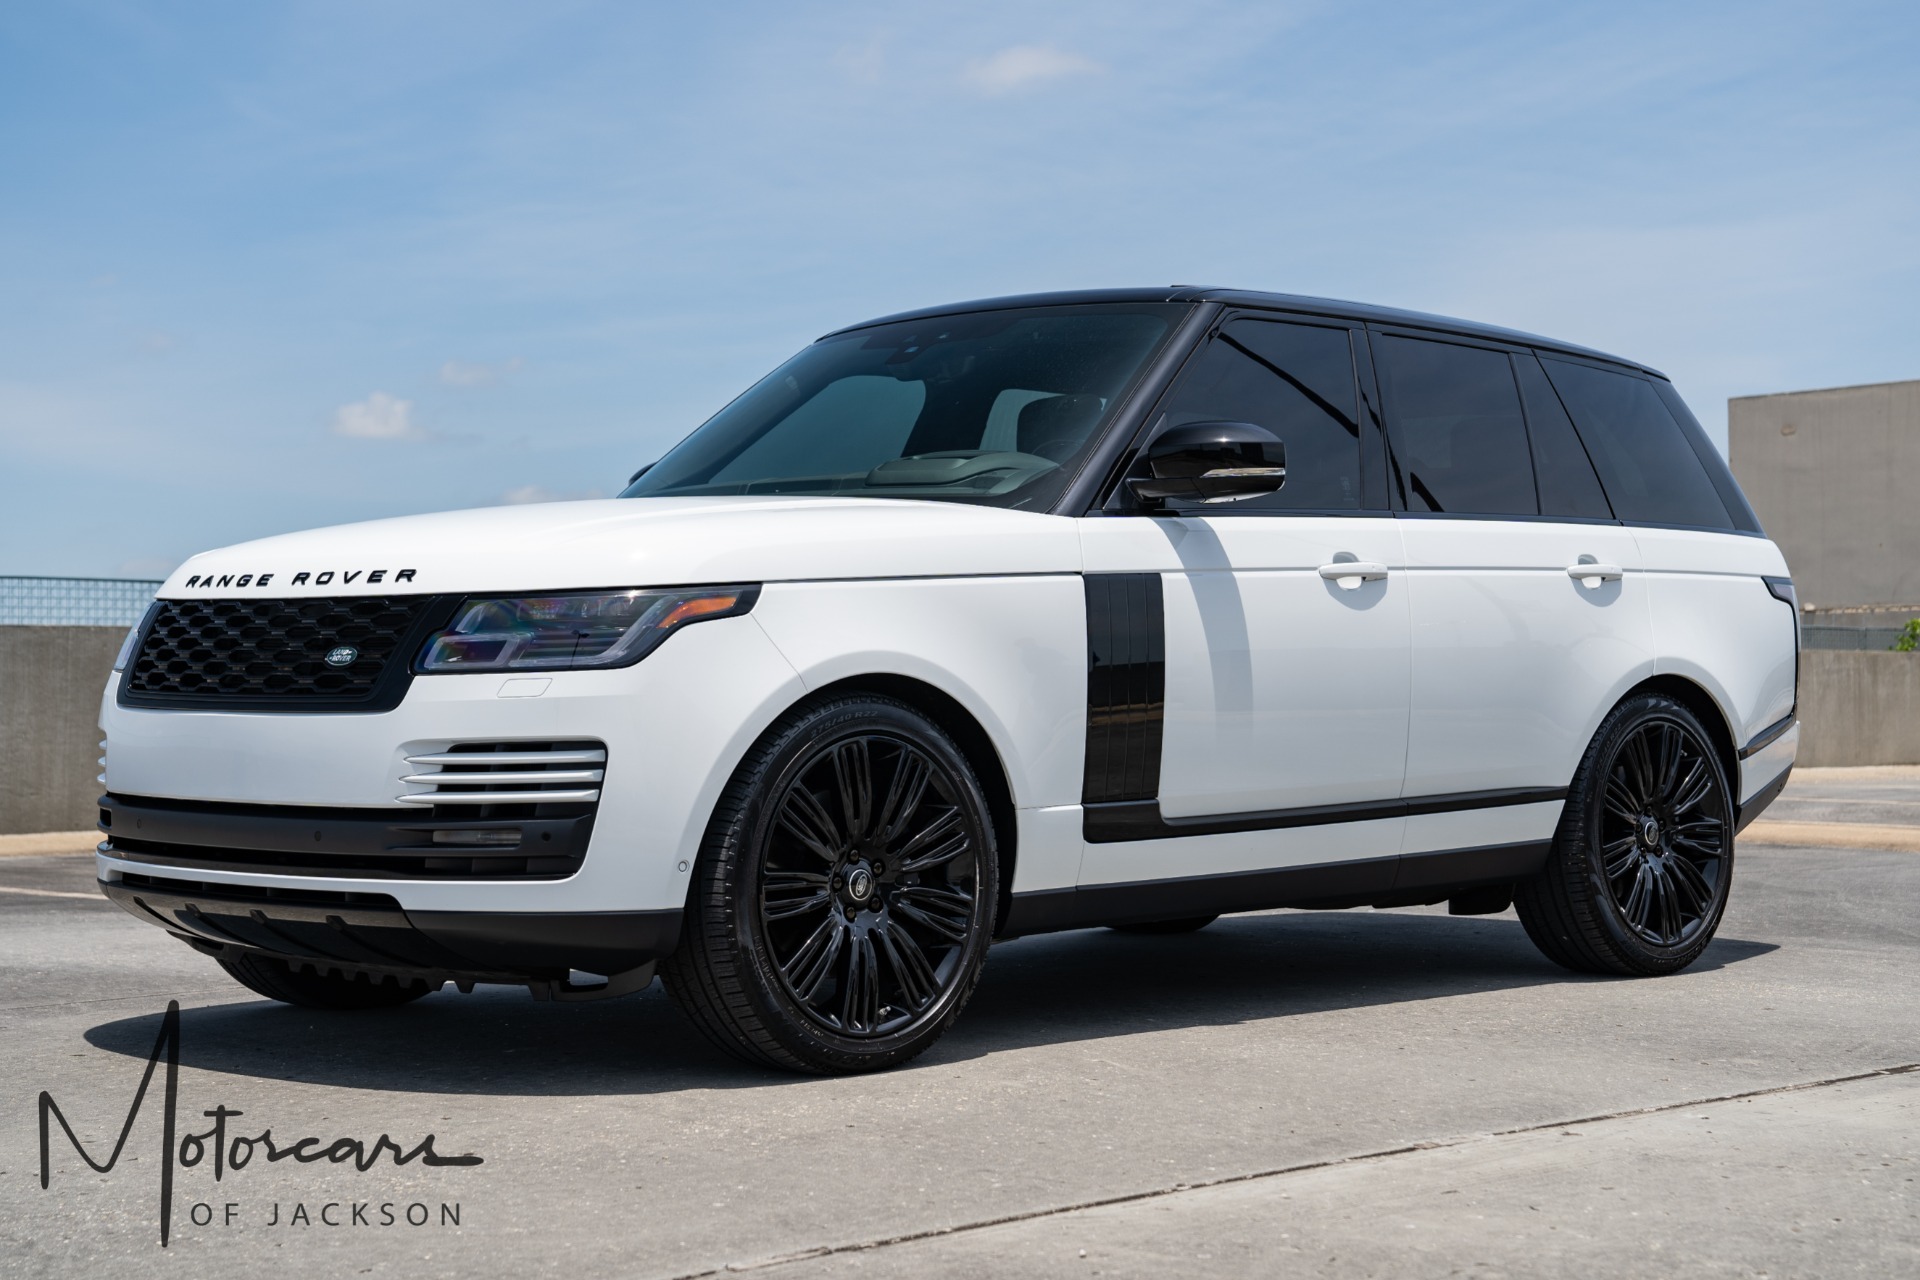 Used-2019-Land-Rover-Range-Rover-for-sale-Jackson-MS